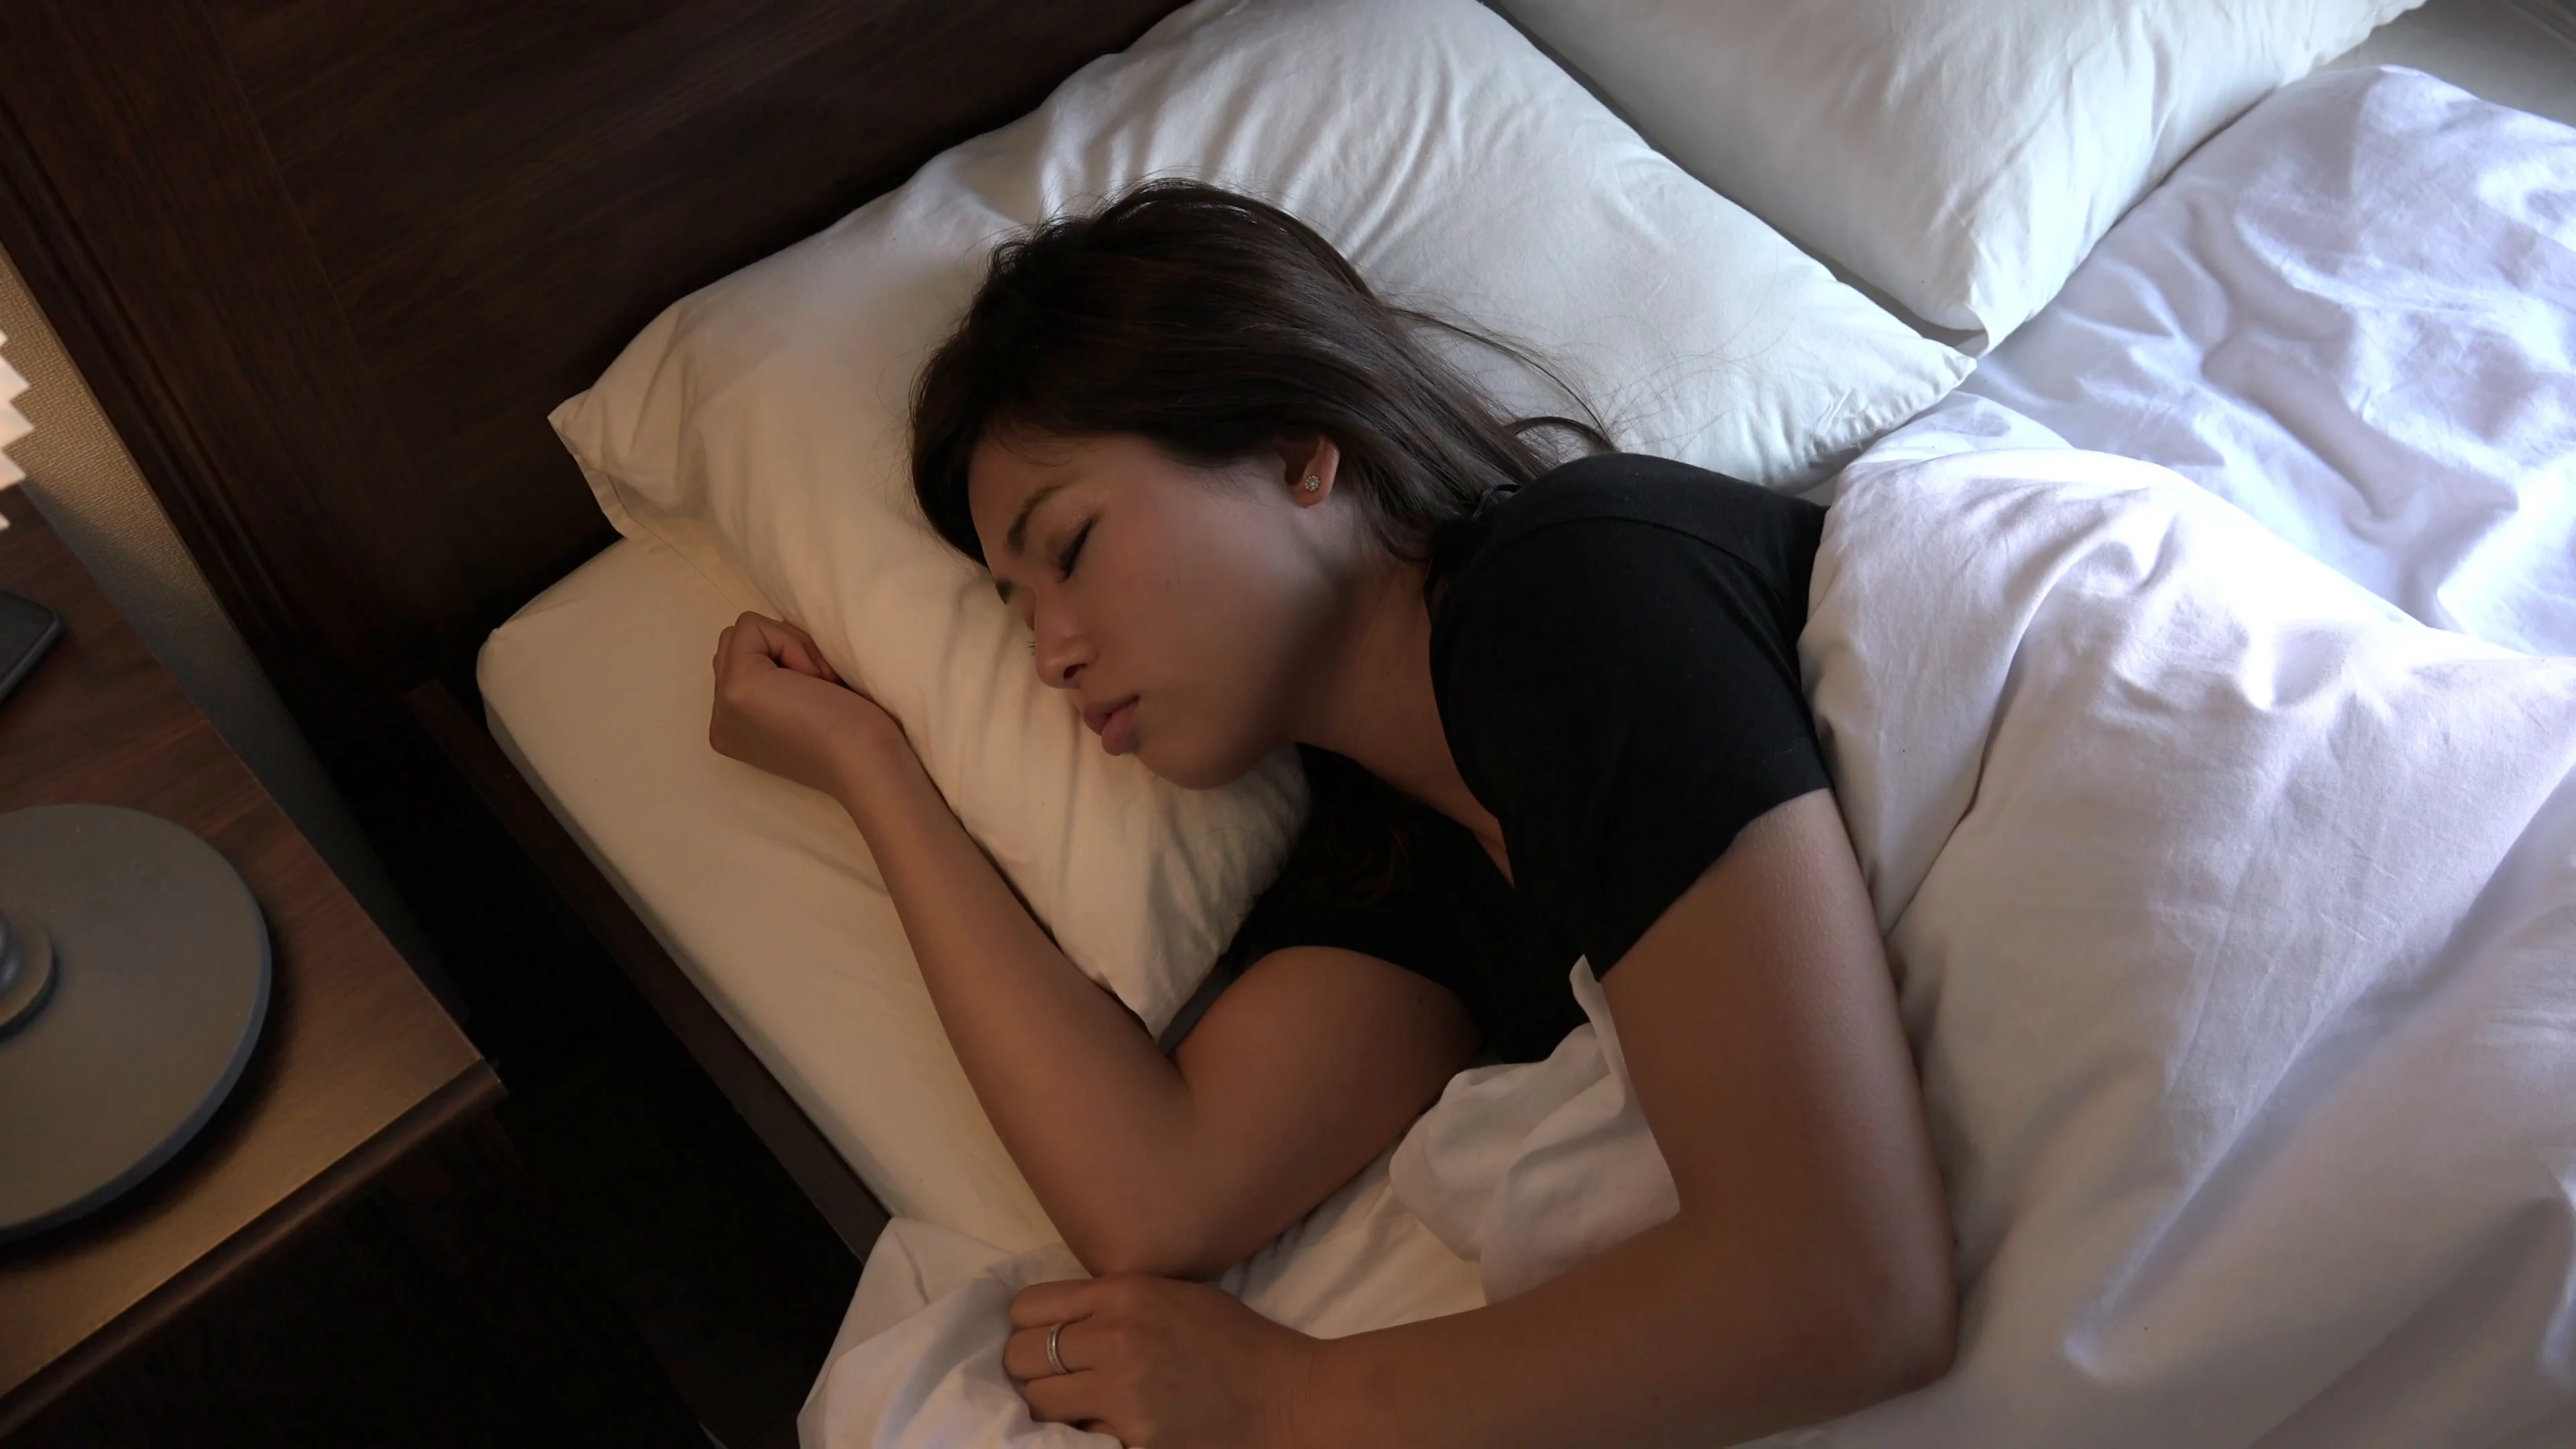 Xxx Porn Chinese While Sleeping - Insomnia With Young Asian Woman Sleeping... | Stock Video | Pond5